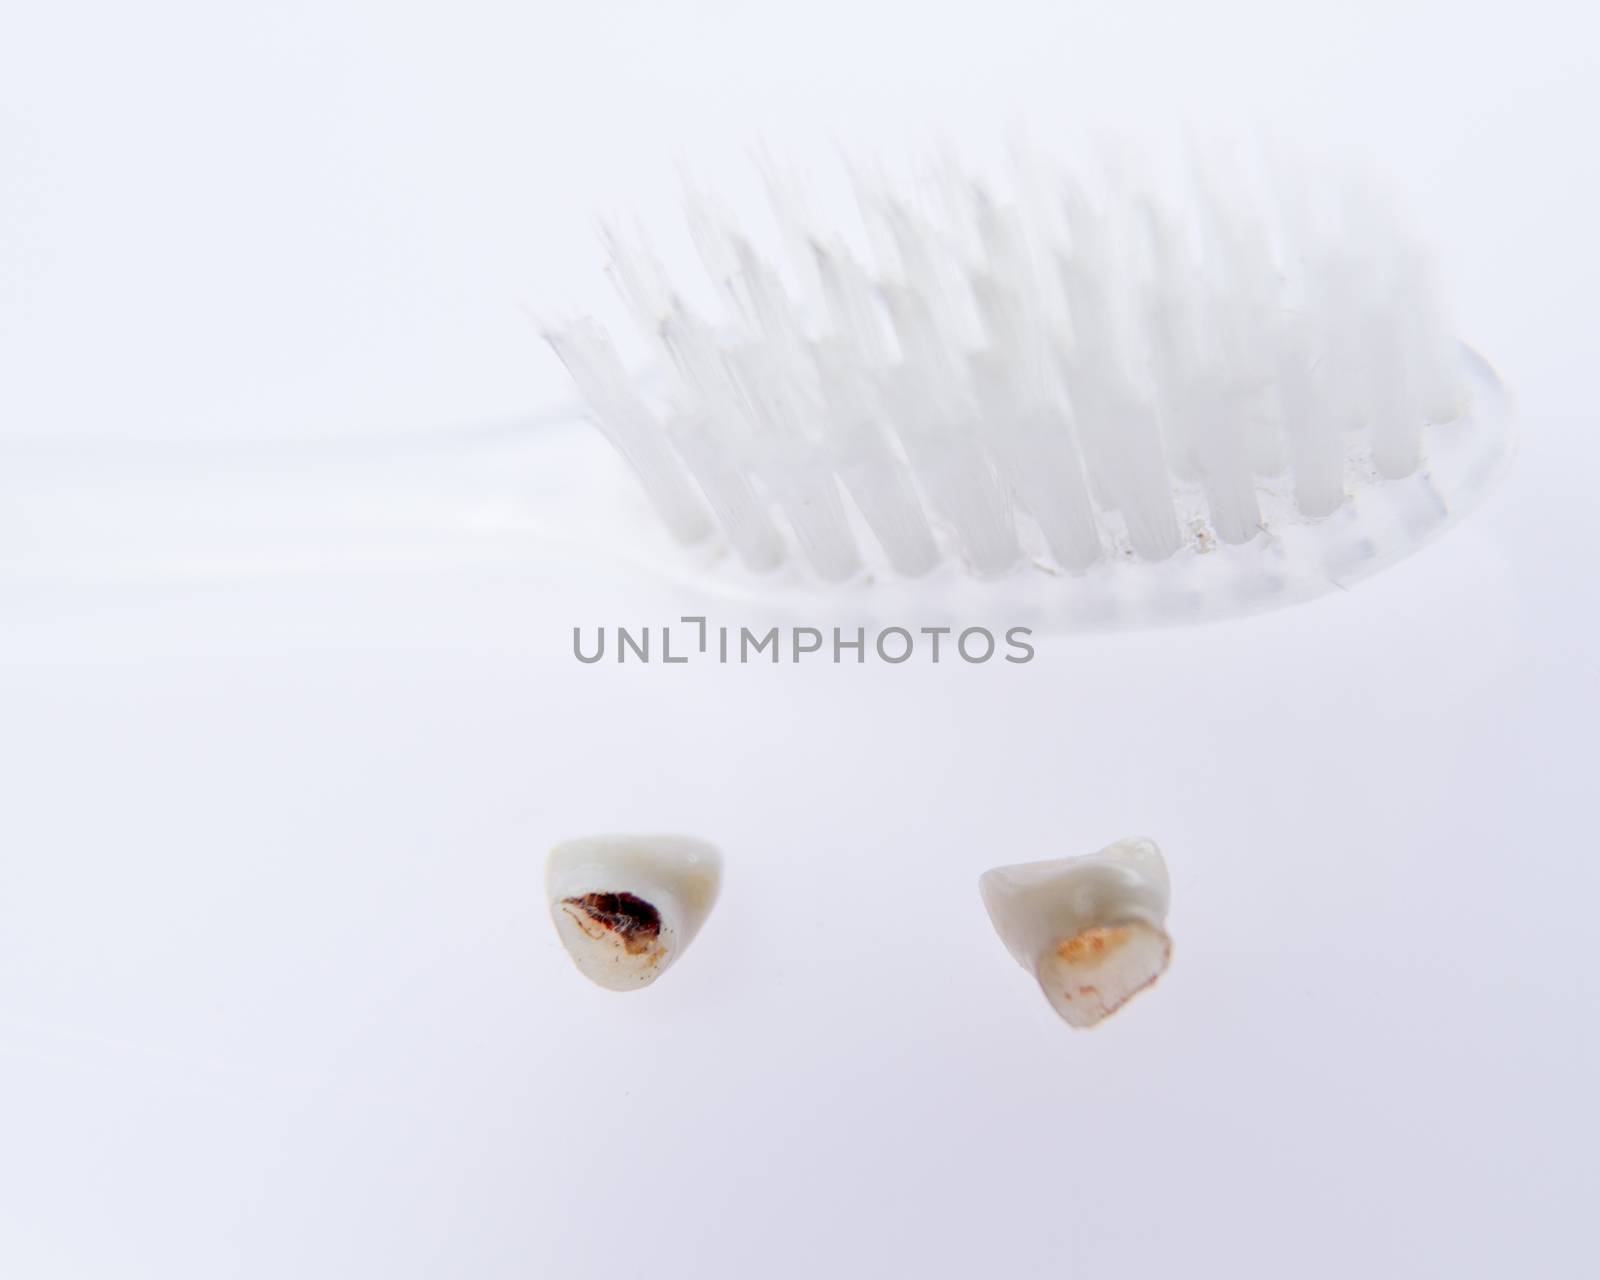 Loose teeth next to toothbrush on white background